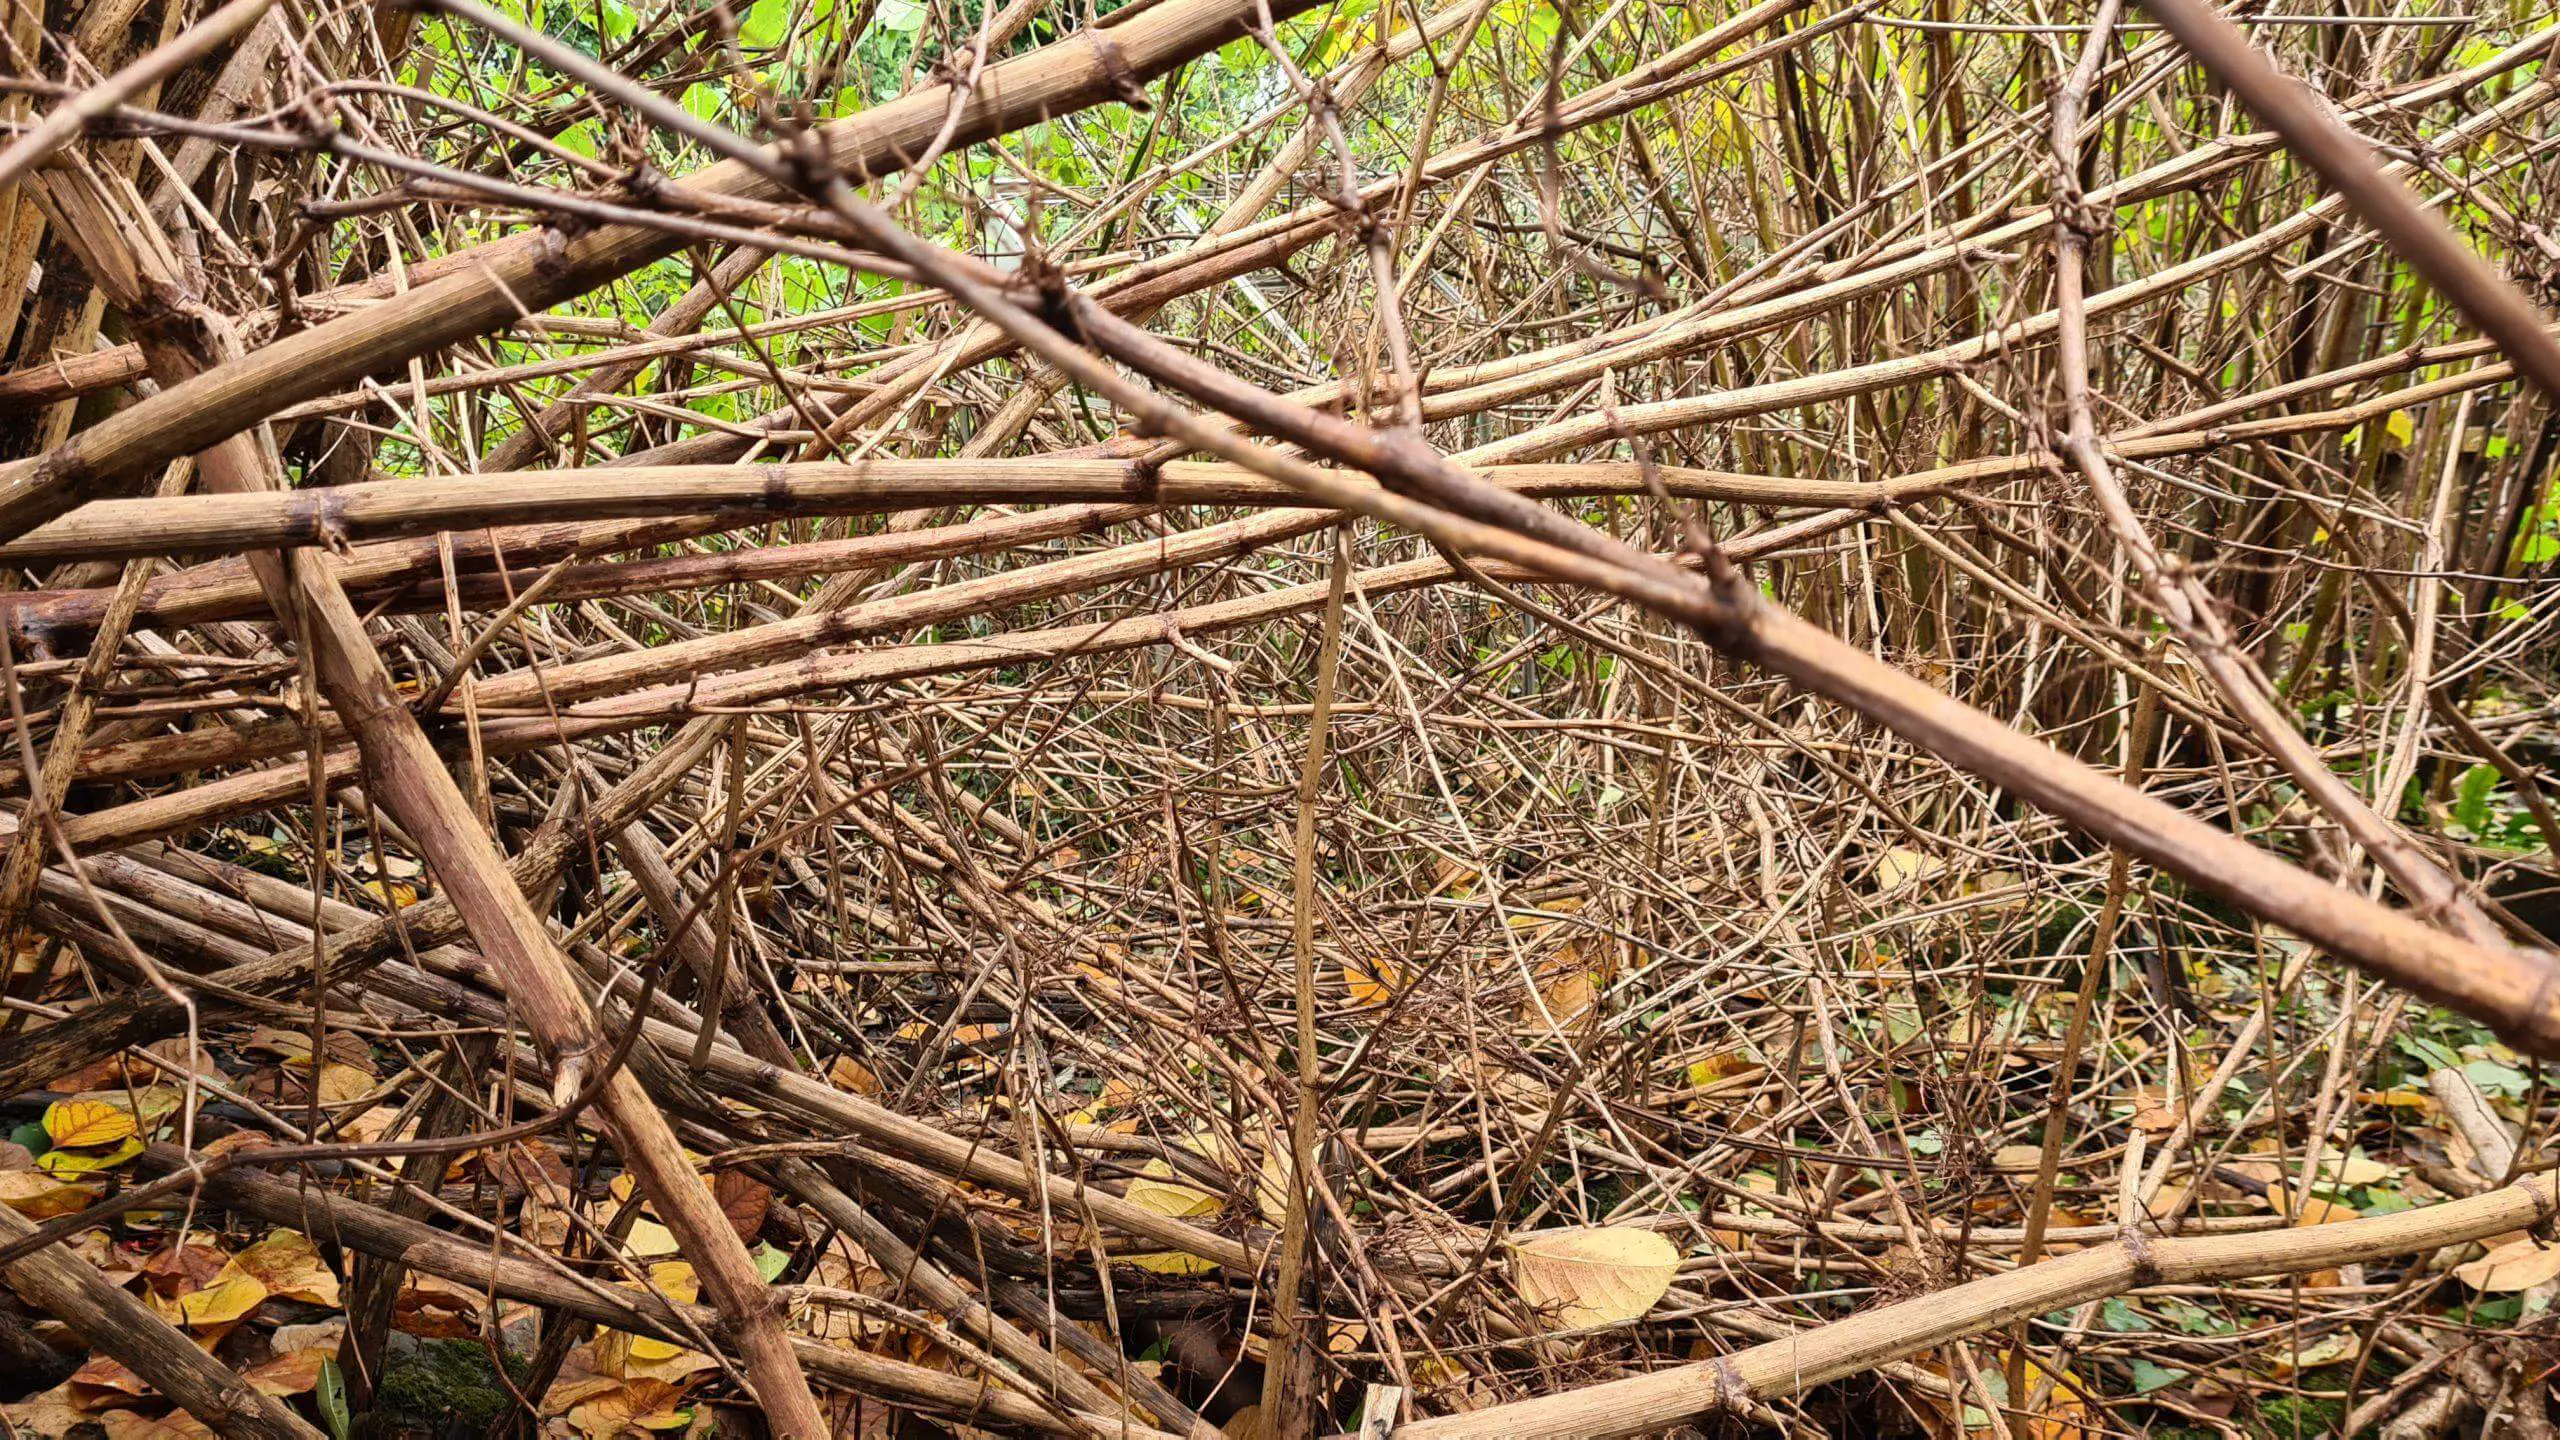 Japanese knotweed stems in winter still consume a garden even when dead